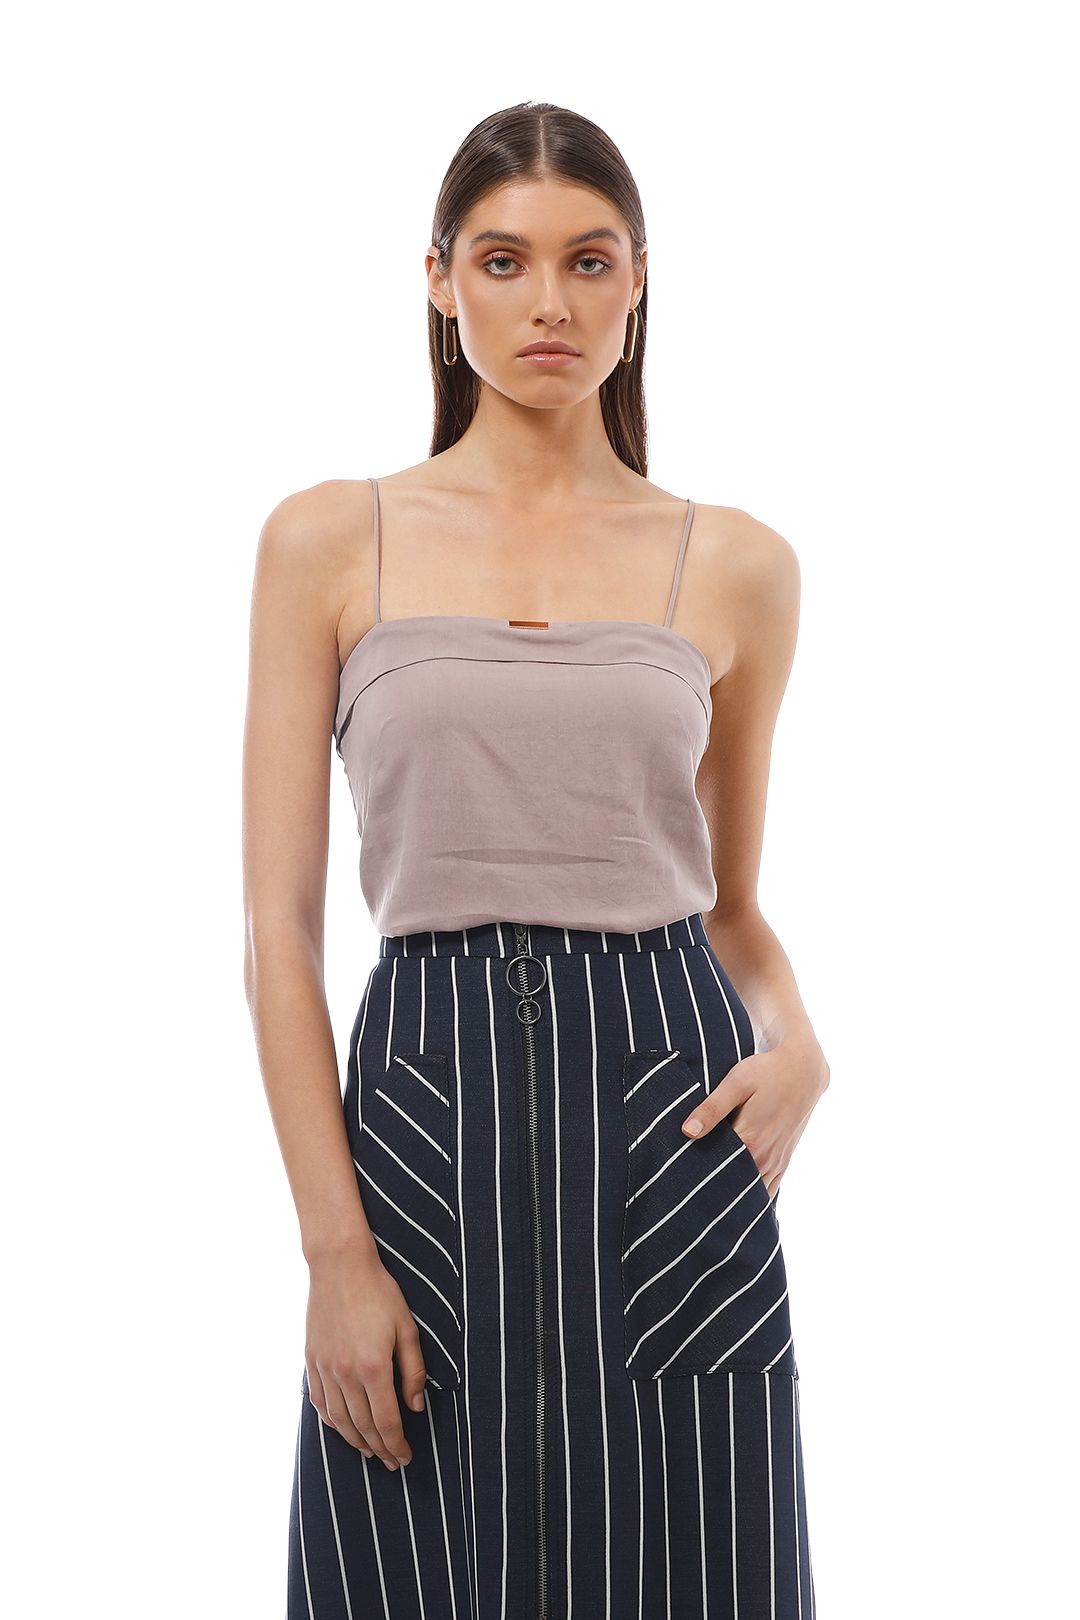 Ginger and Smart - The Entropy Cami - Dusty Pink - Front Crop